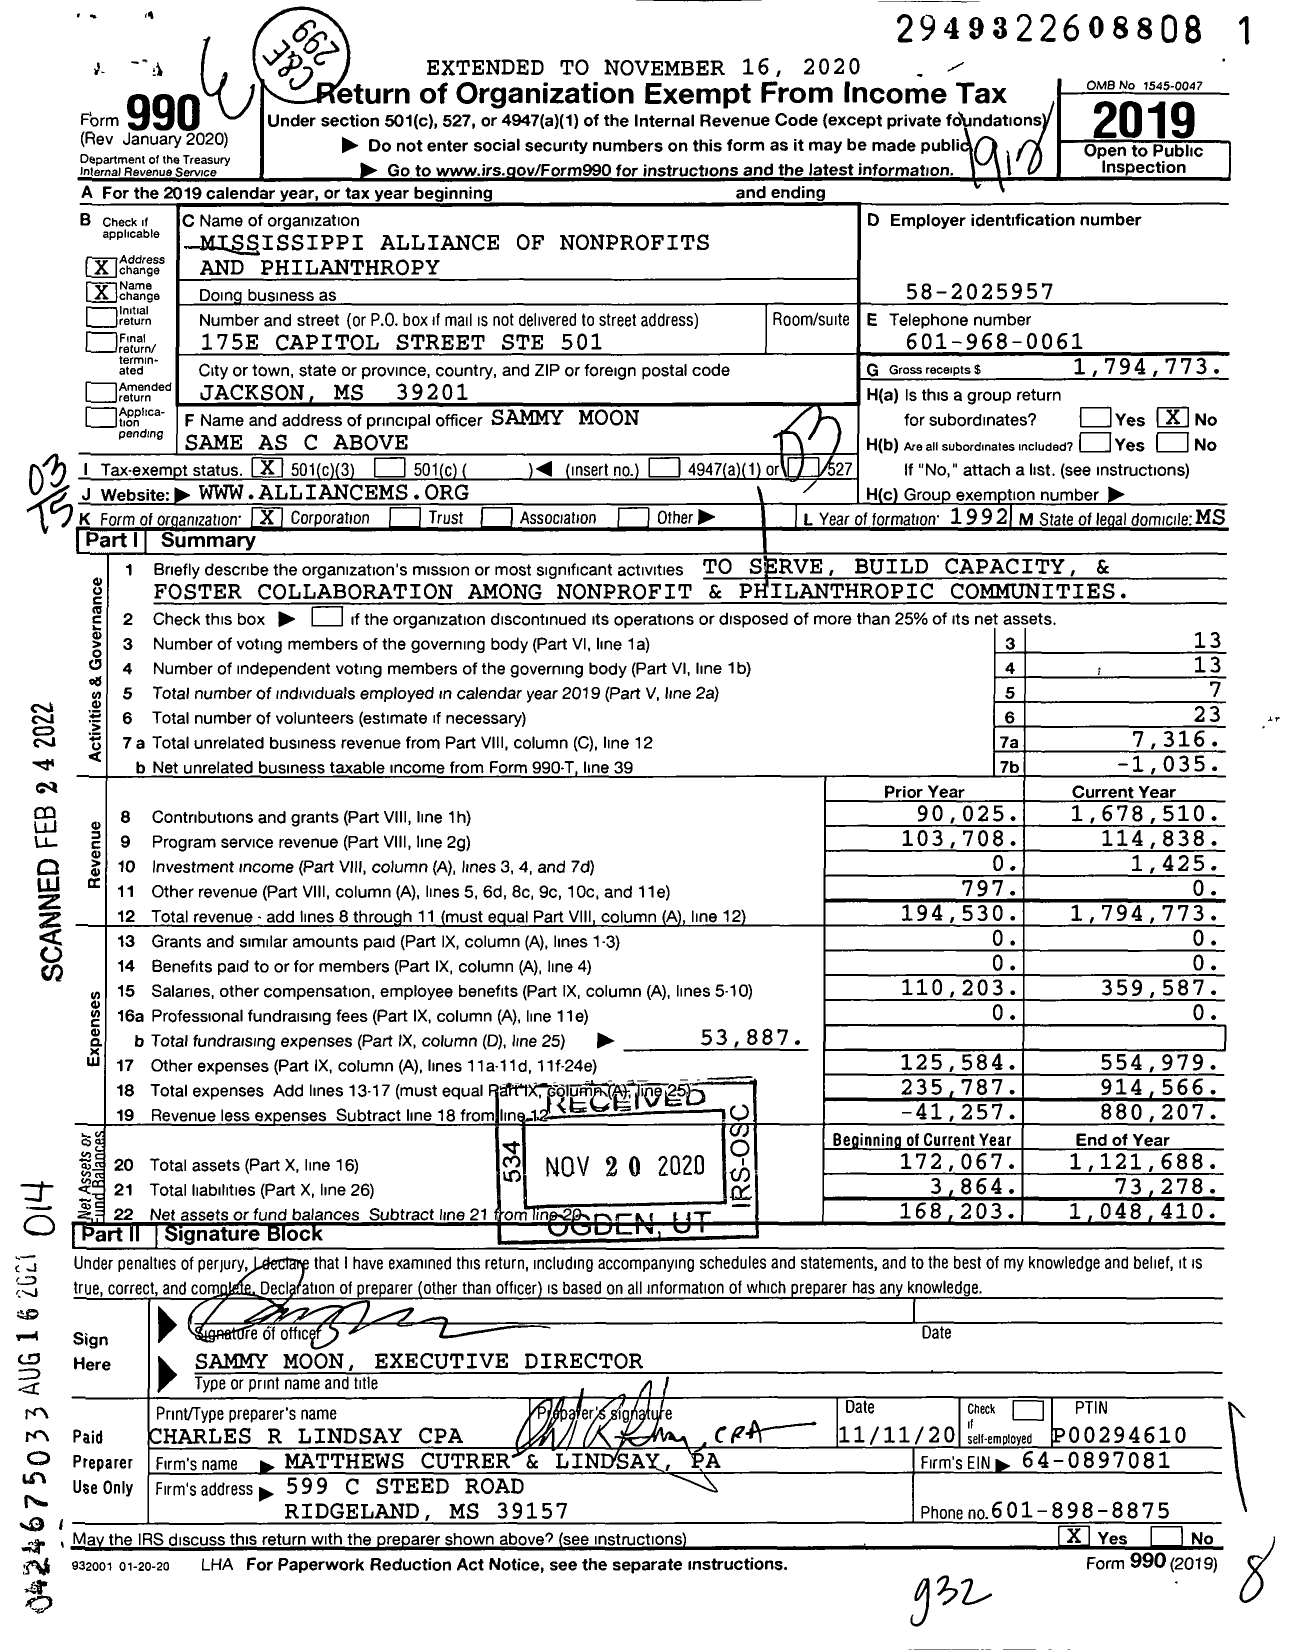 Image of first page of 2019 Form 990 for Mississippi Alliance of Nonprofits and Philanthropy